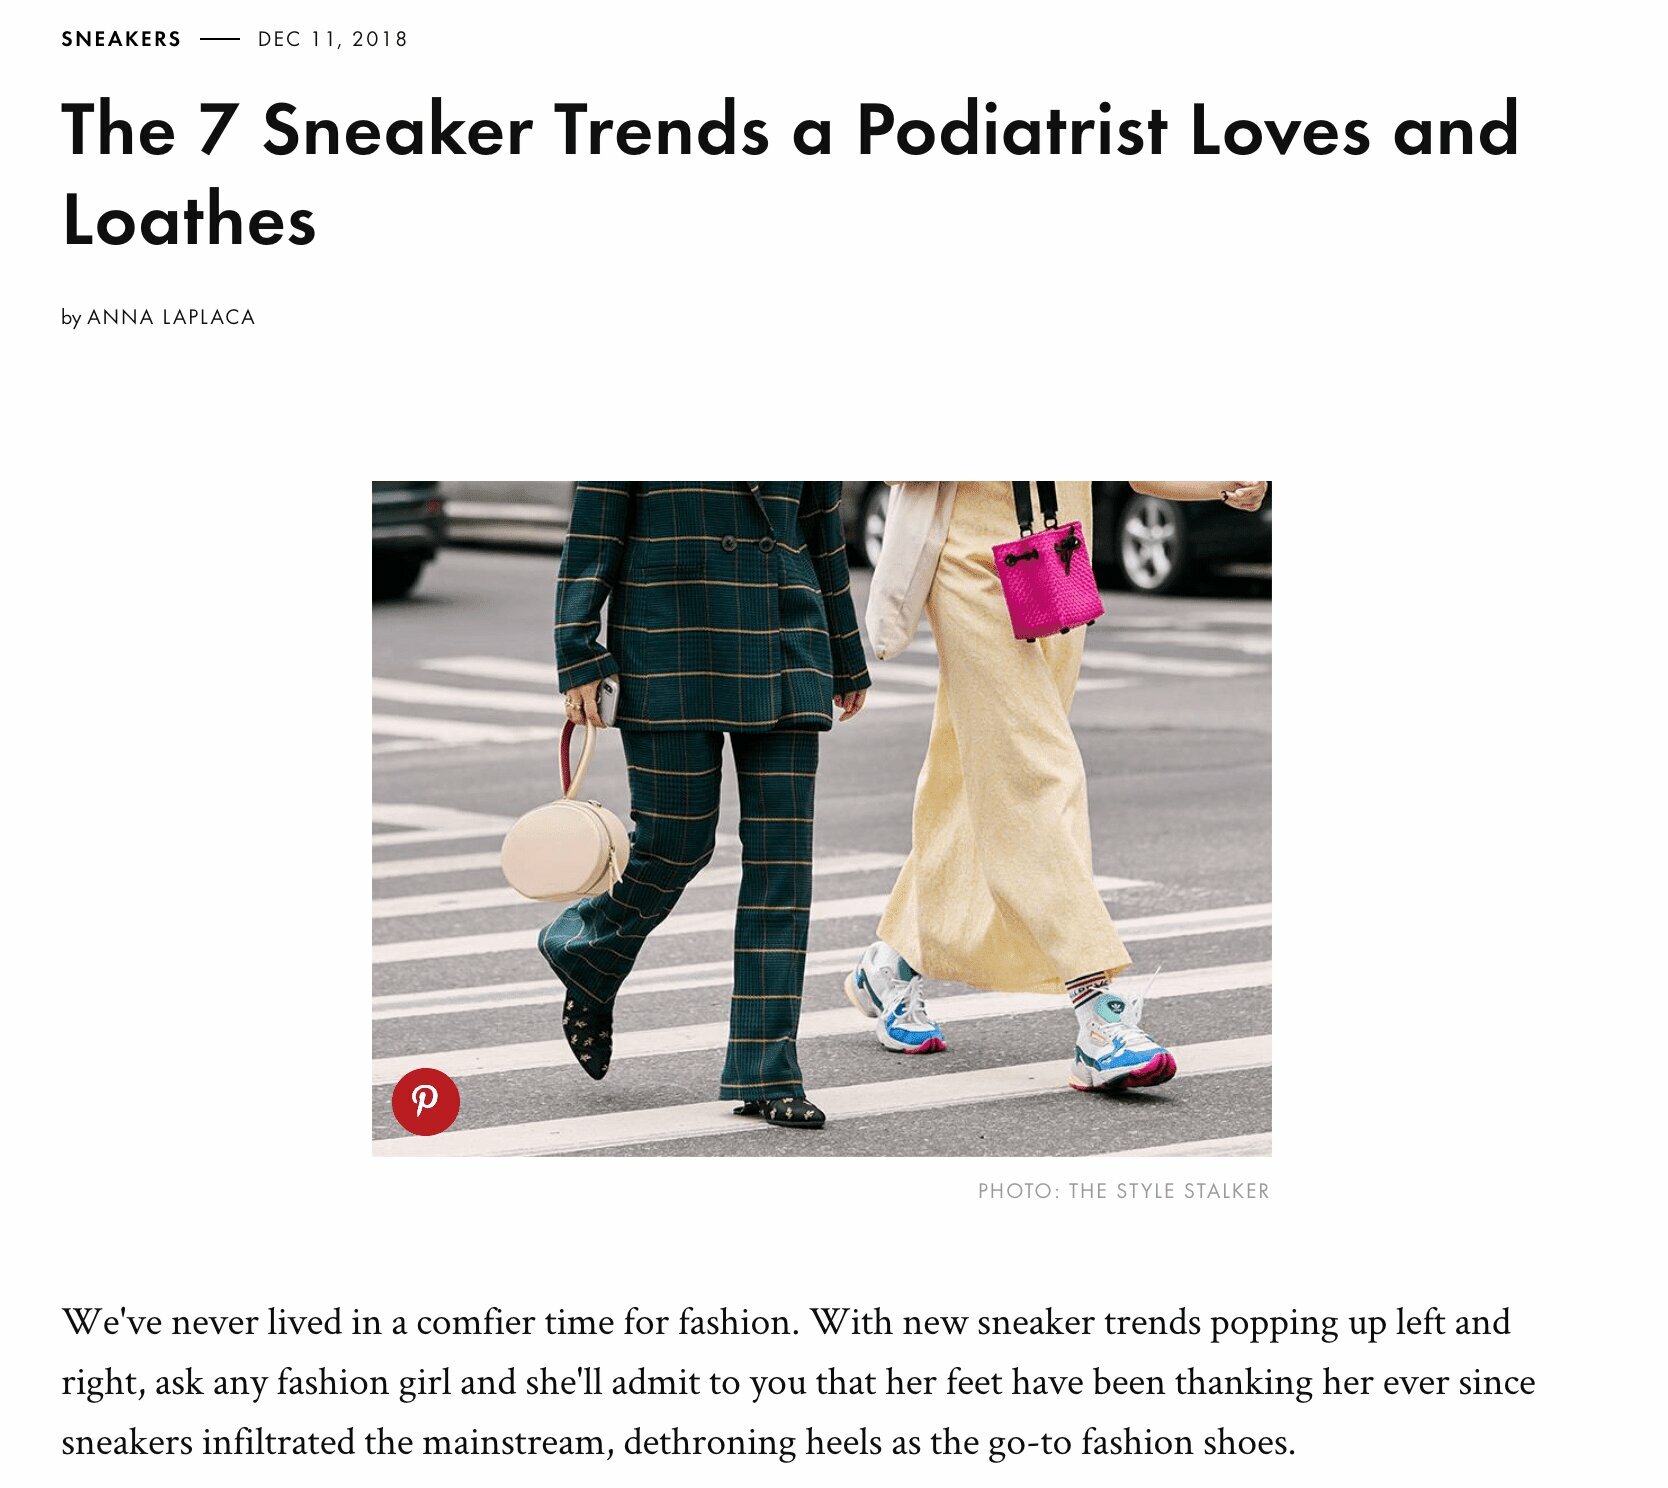 Fashion Site Interviews Dr. Cunha on Sneaker Trend